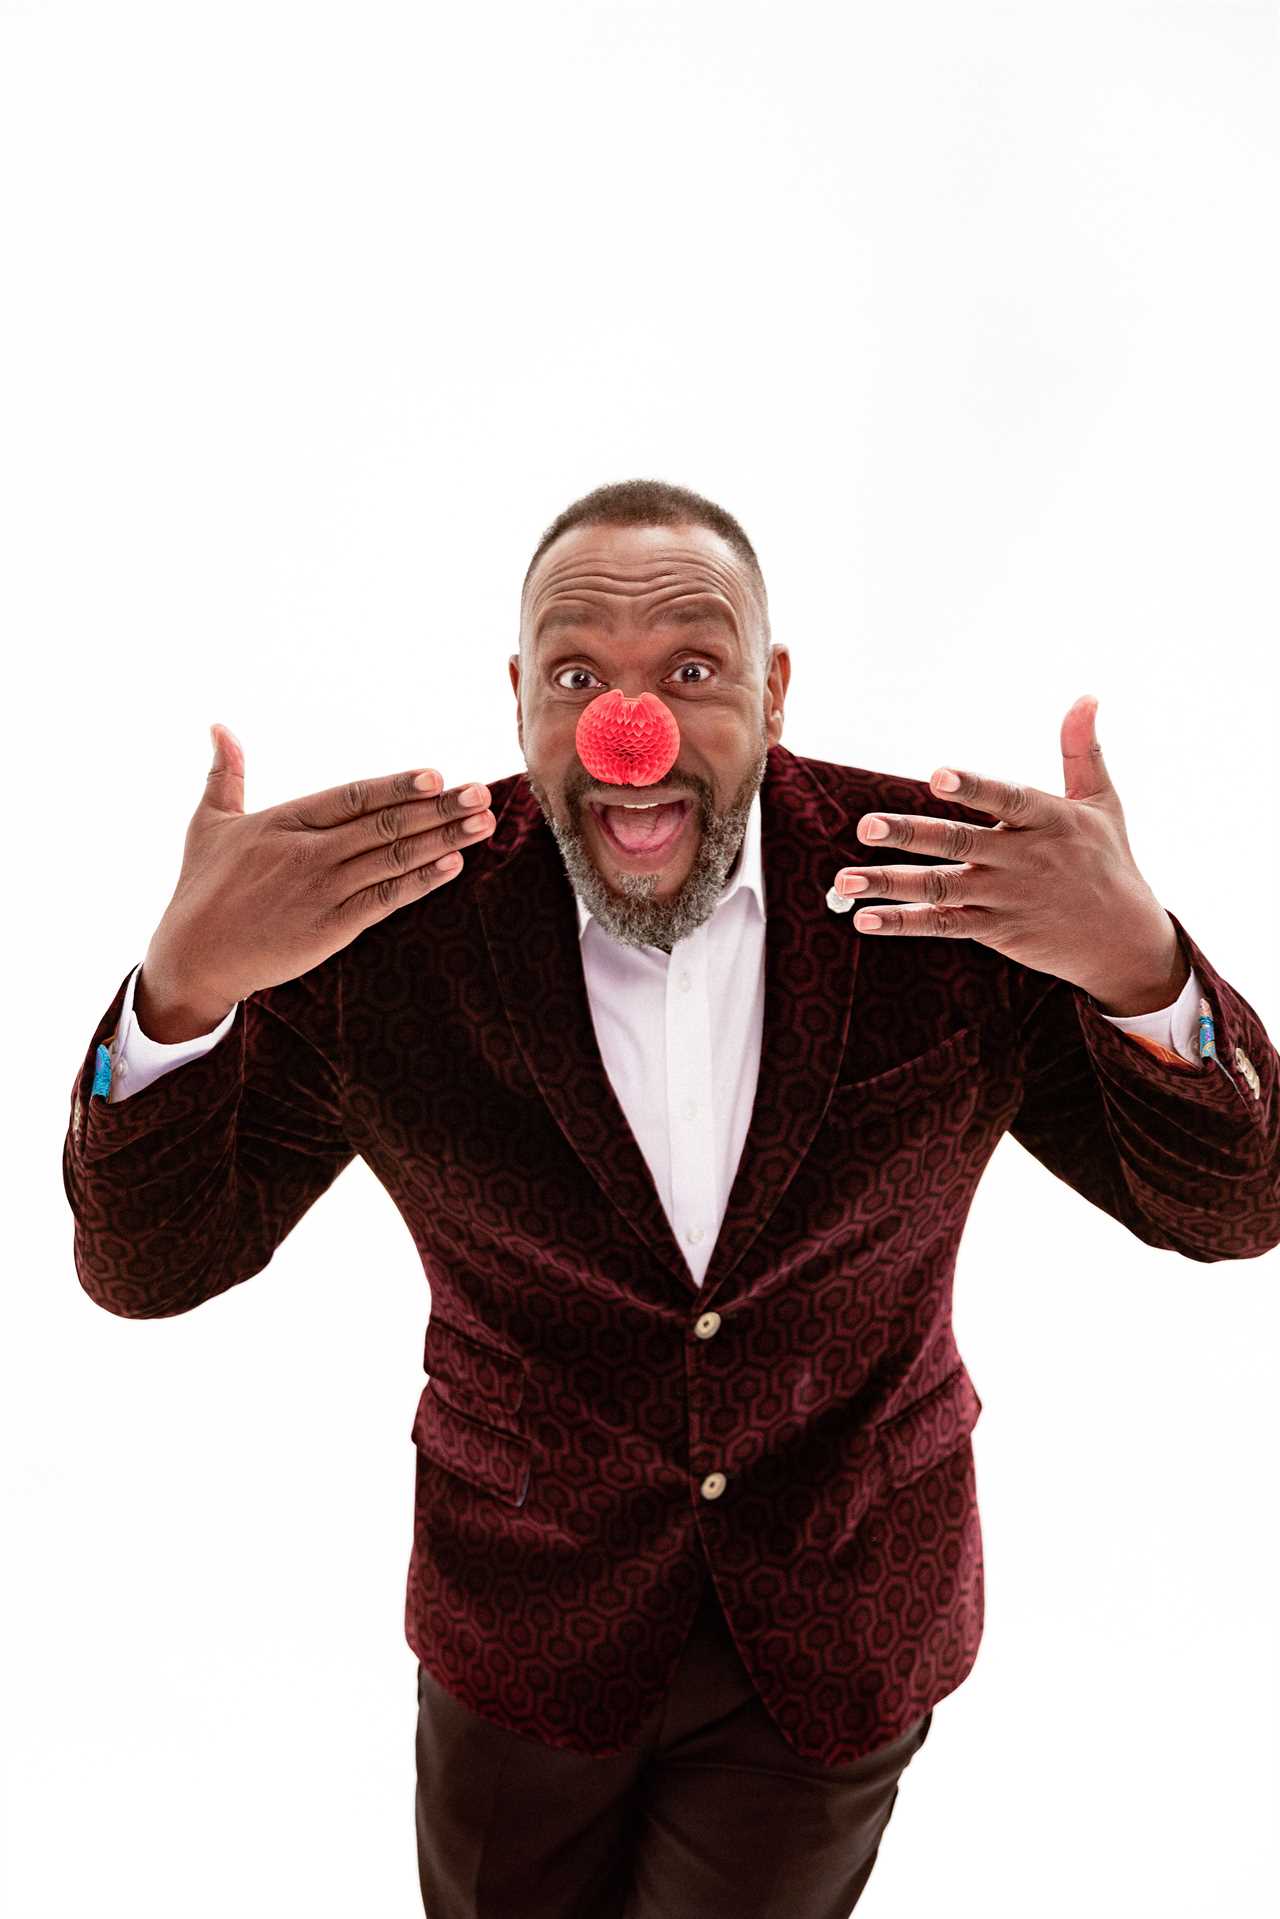 LONDON, UNITED KINGDOM - JANUARY 2023: Comedian and actor, Lenny Henry supports Red Nose Day 2023 by wearing the latest Nose, this year being provided by Amazon. Taken during the filiming of the New Nose Launch Film in London on the 16th January 2023. (Photo by Richard Davenport/Comic Relief)